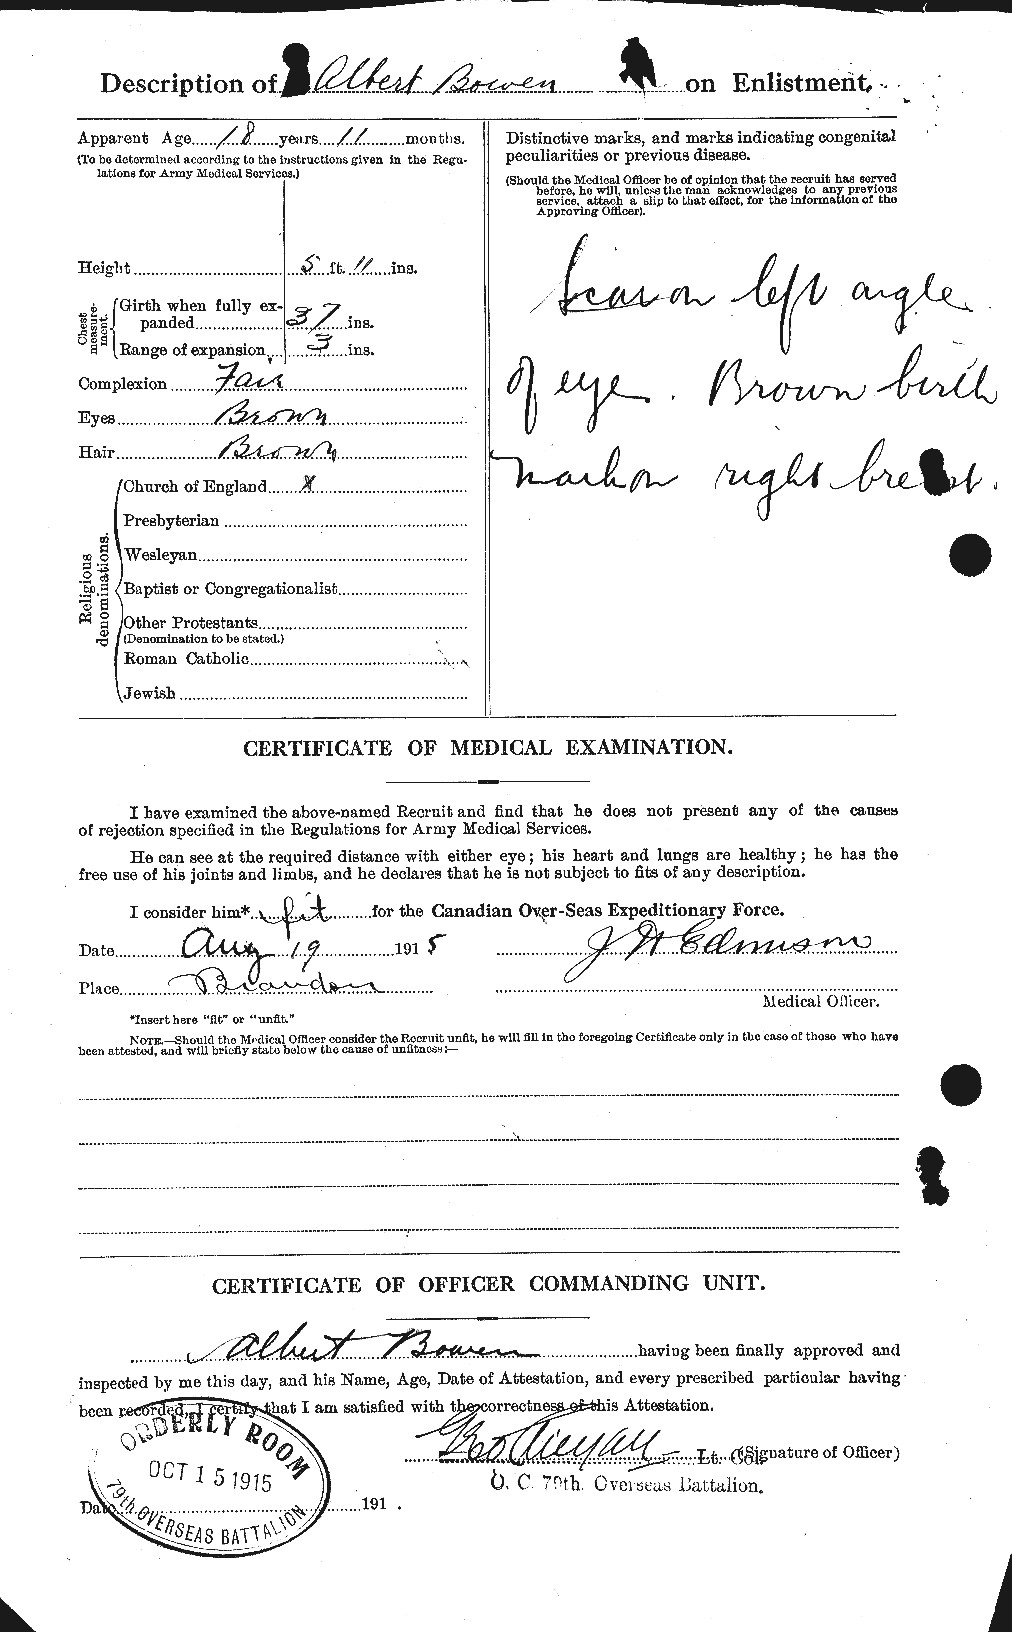 Personnel Records of the First World War - CEF 255345b